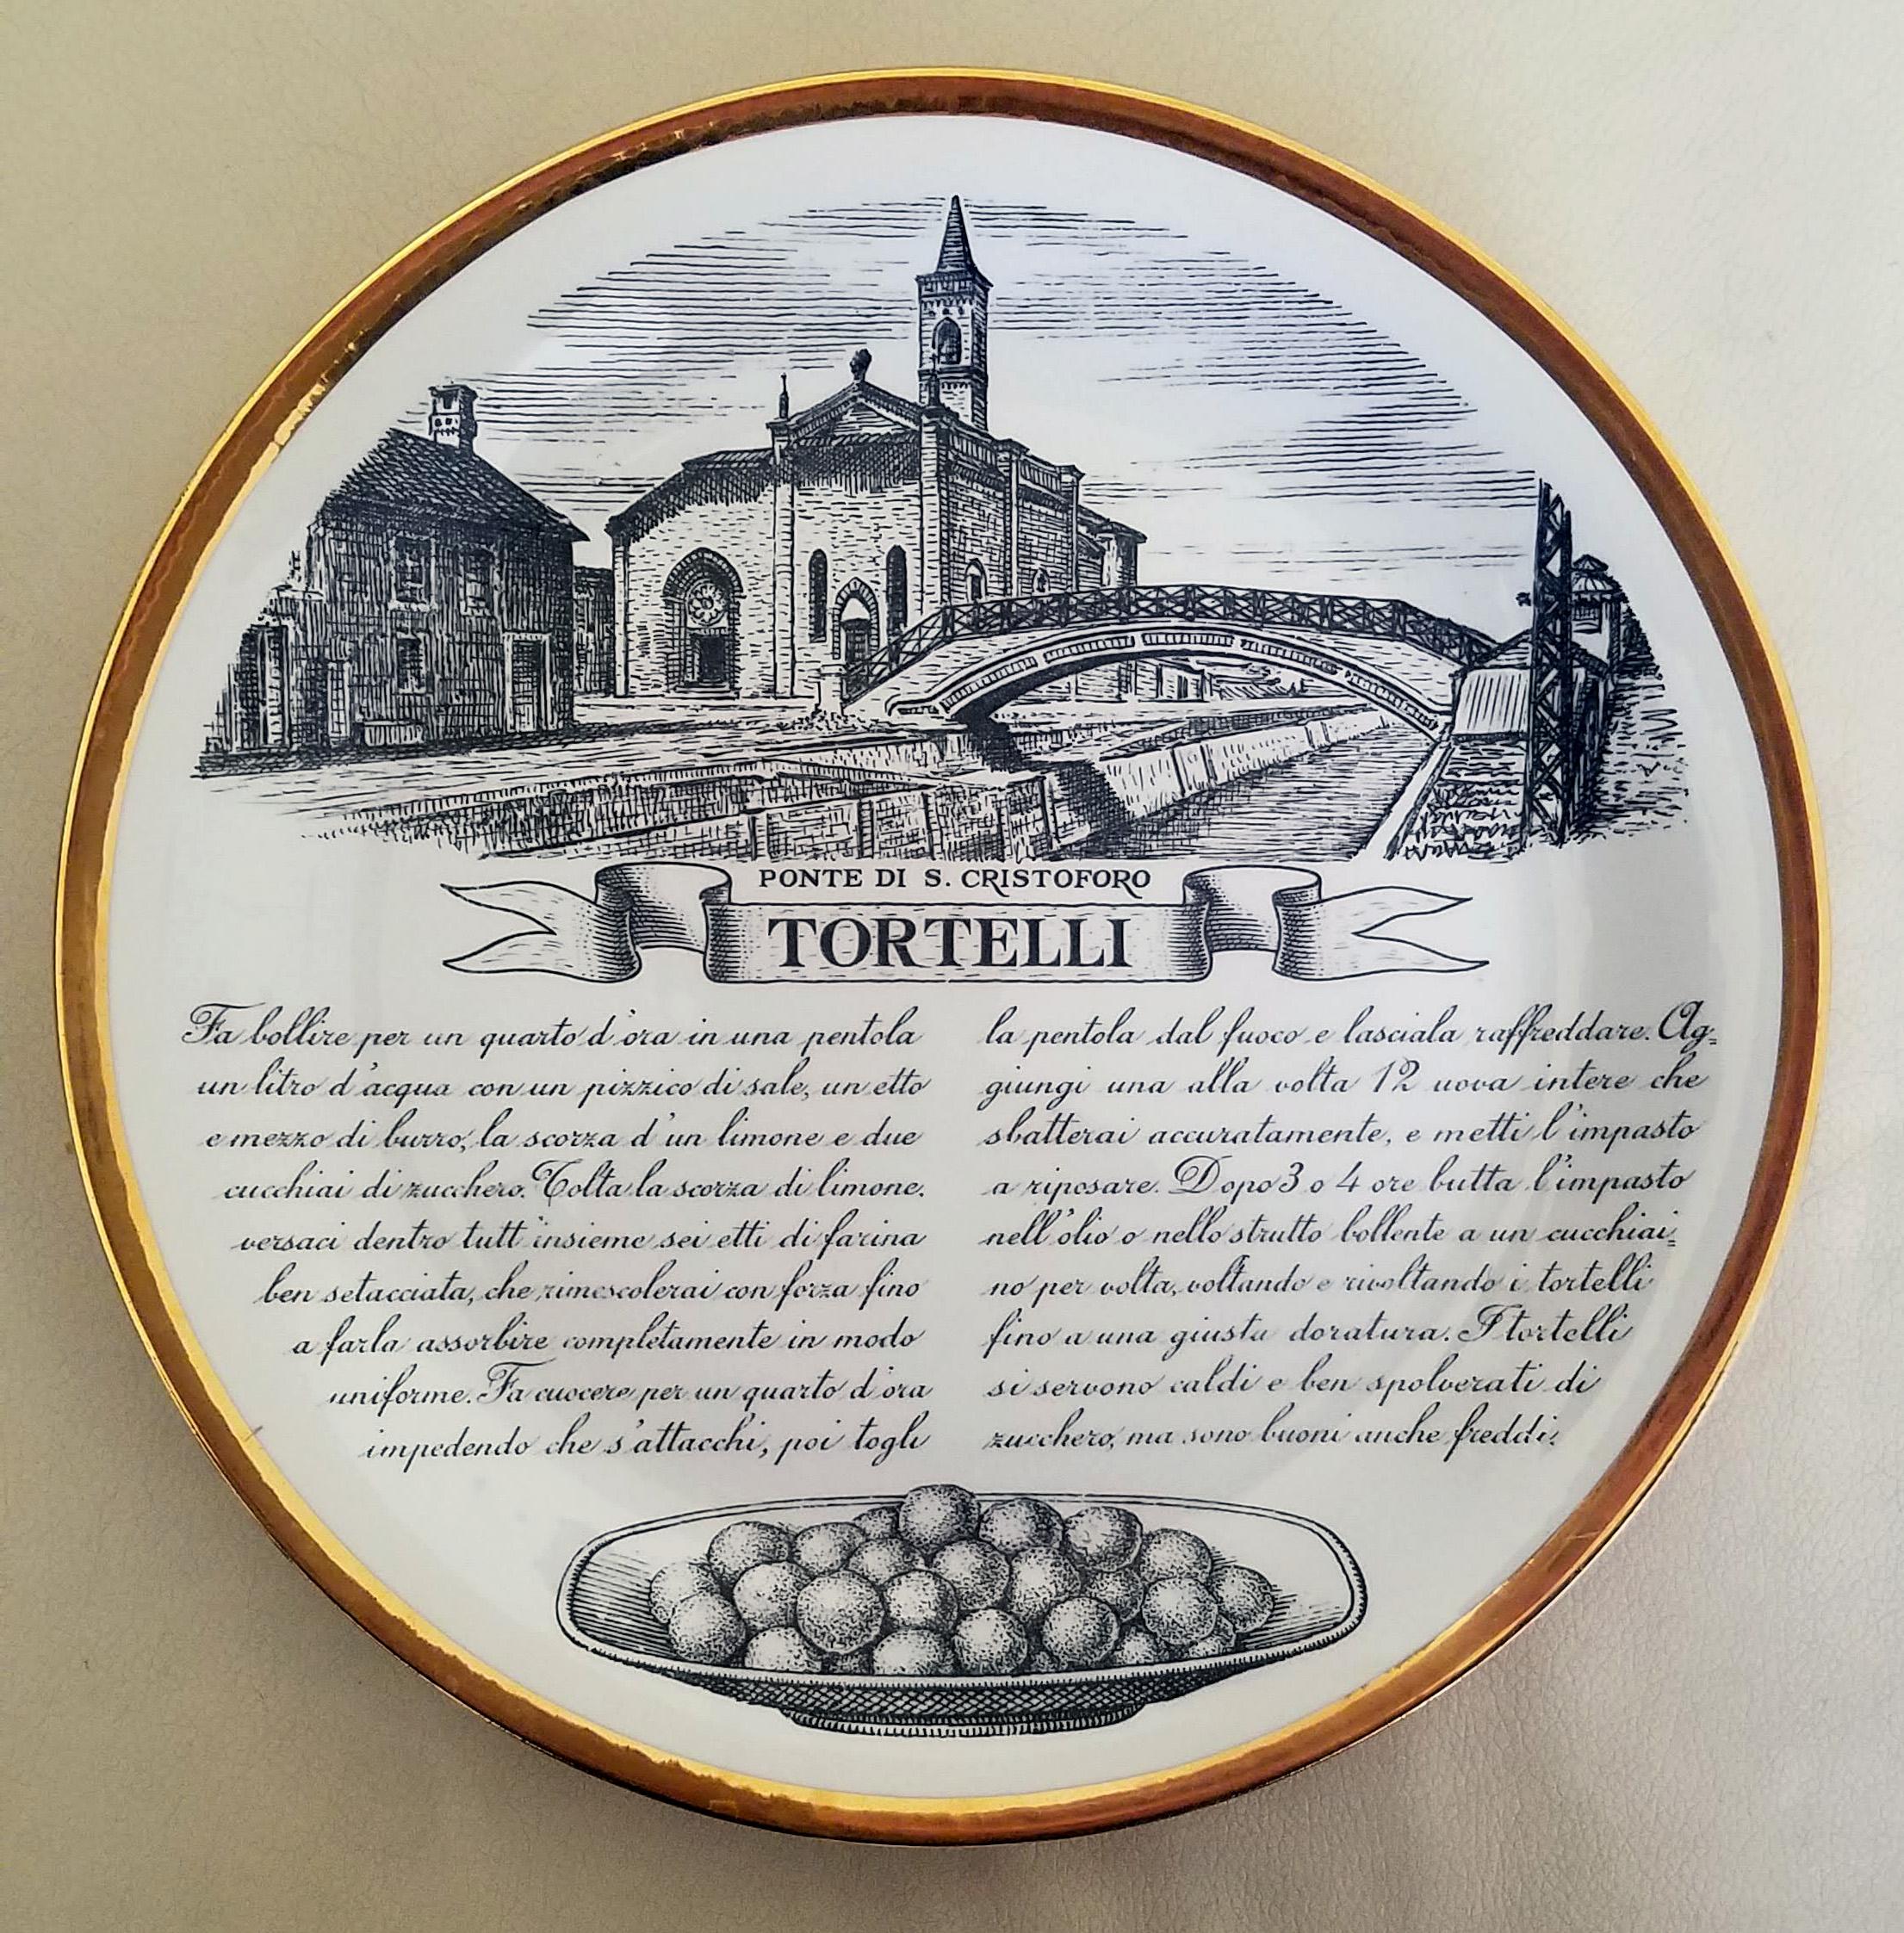 Piero Fornasetti Specialità Milanese 
Complete set of twelve porcelain plates,
1960-1970.

The complete set of twelve Specialità Milanese porcelain plates designed by Piero Fornasetti are each designed with a different traditional recipe, they have